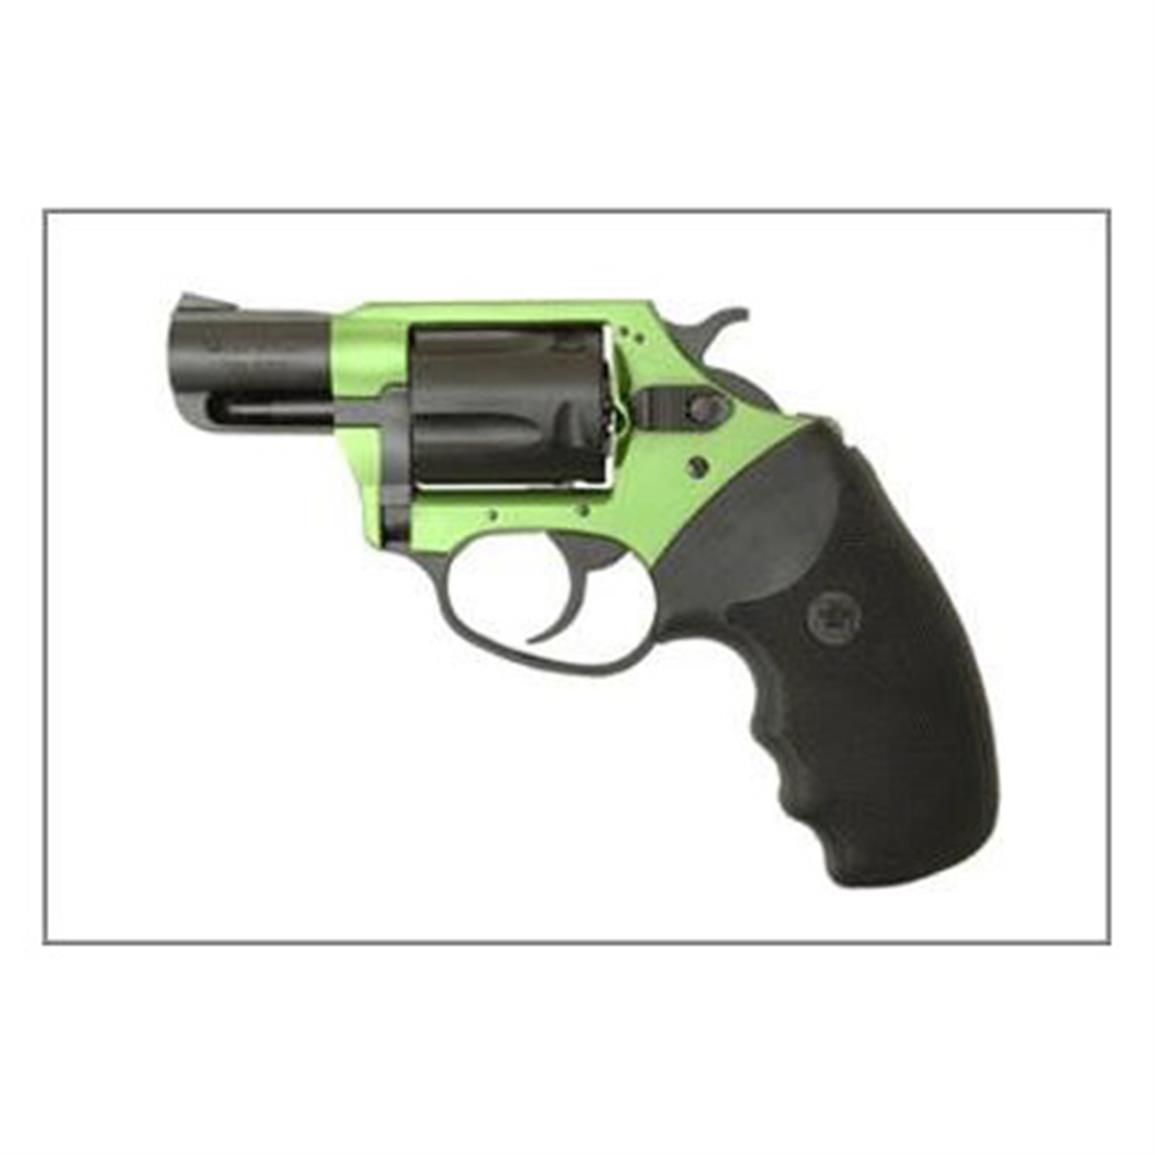 Charter Arms Shamrock Undercover Lite, Revolver, .38 Special, 2" Barrel, 5 Rounds